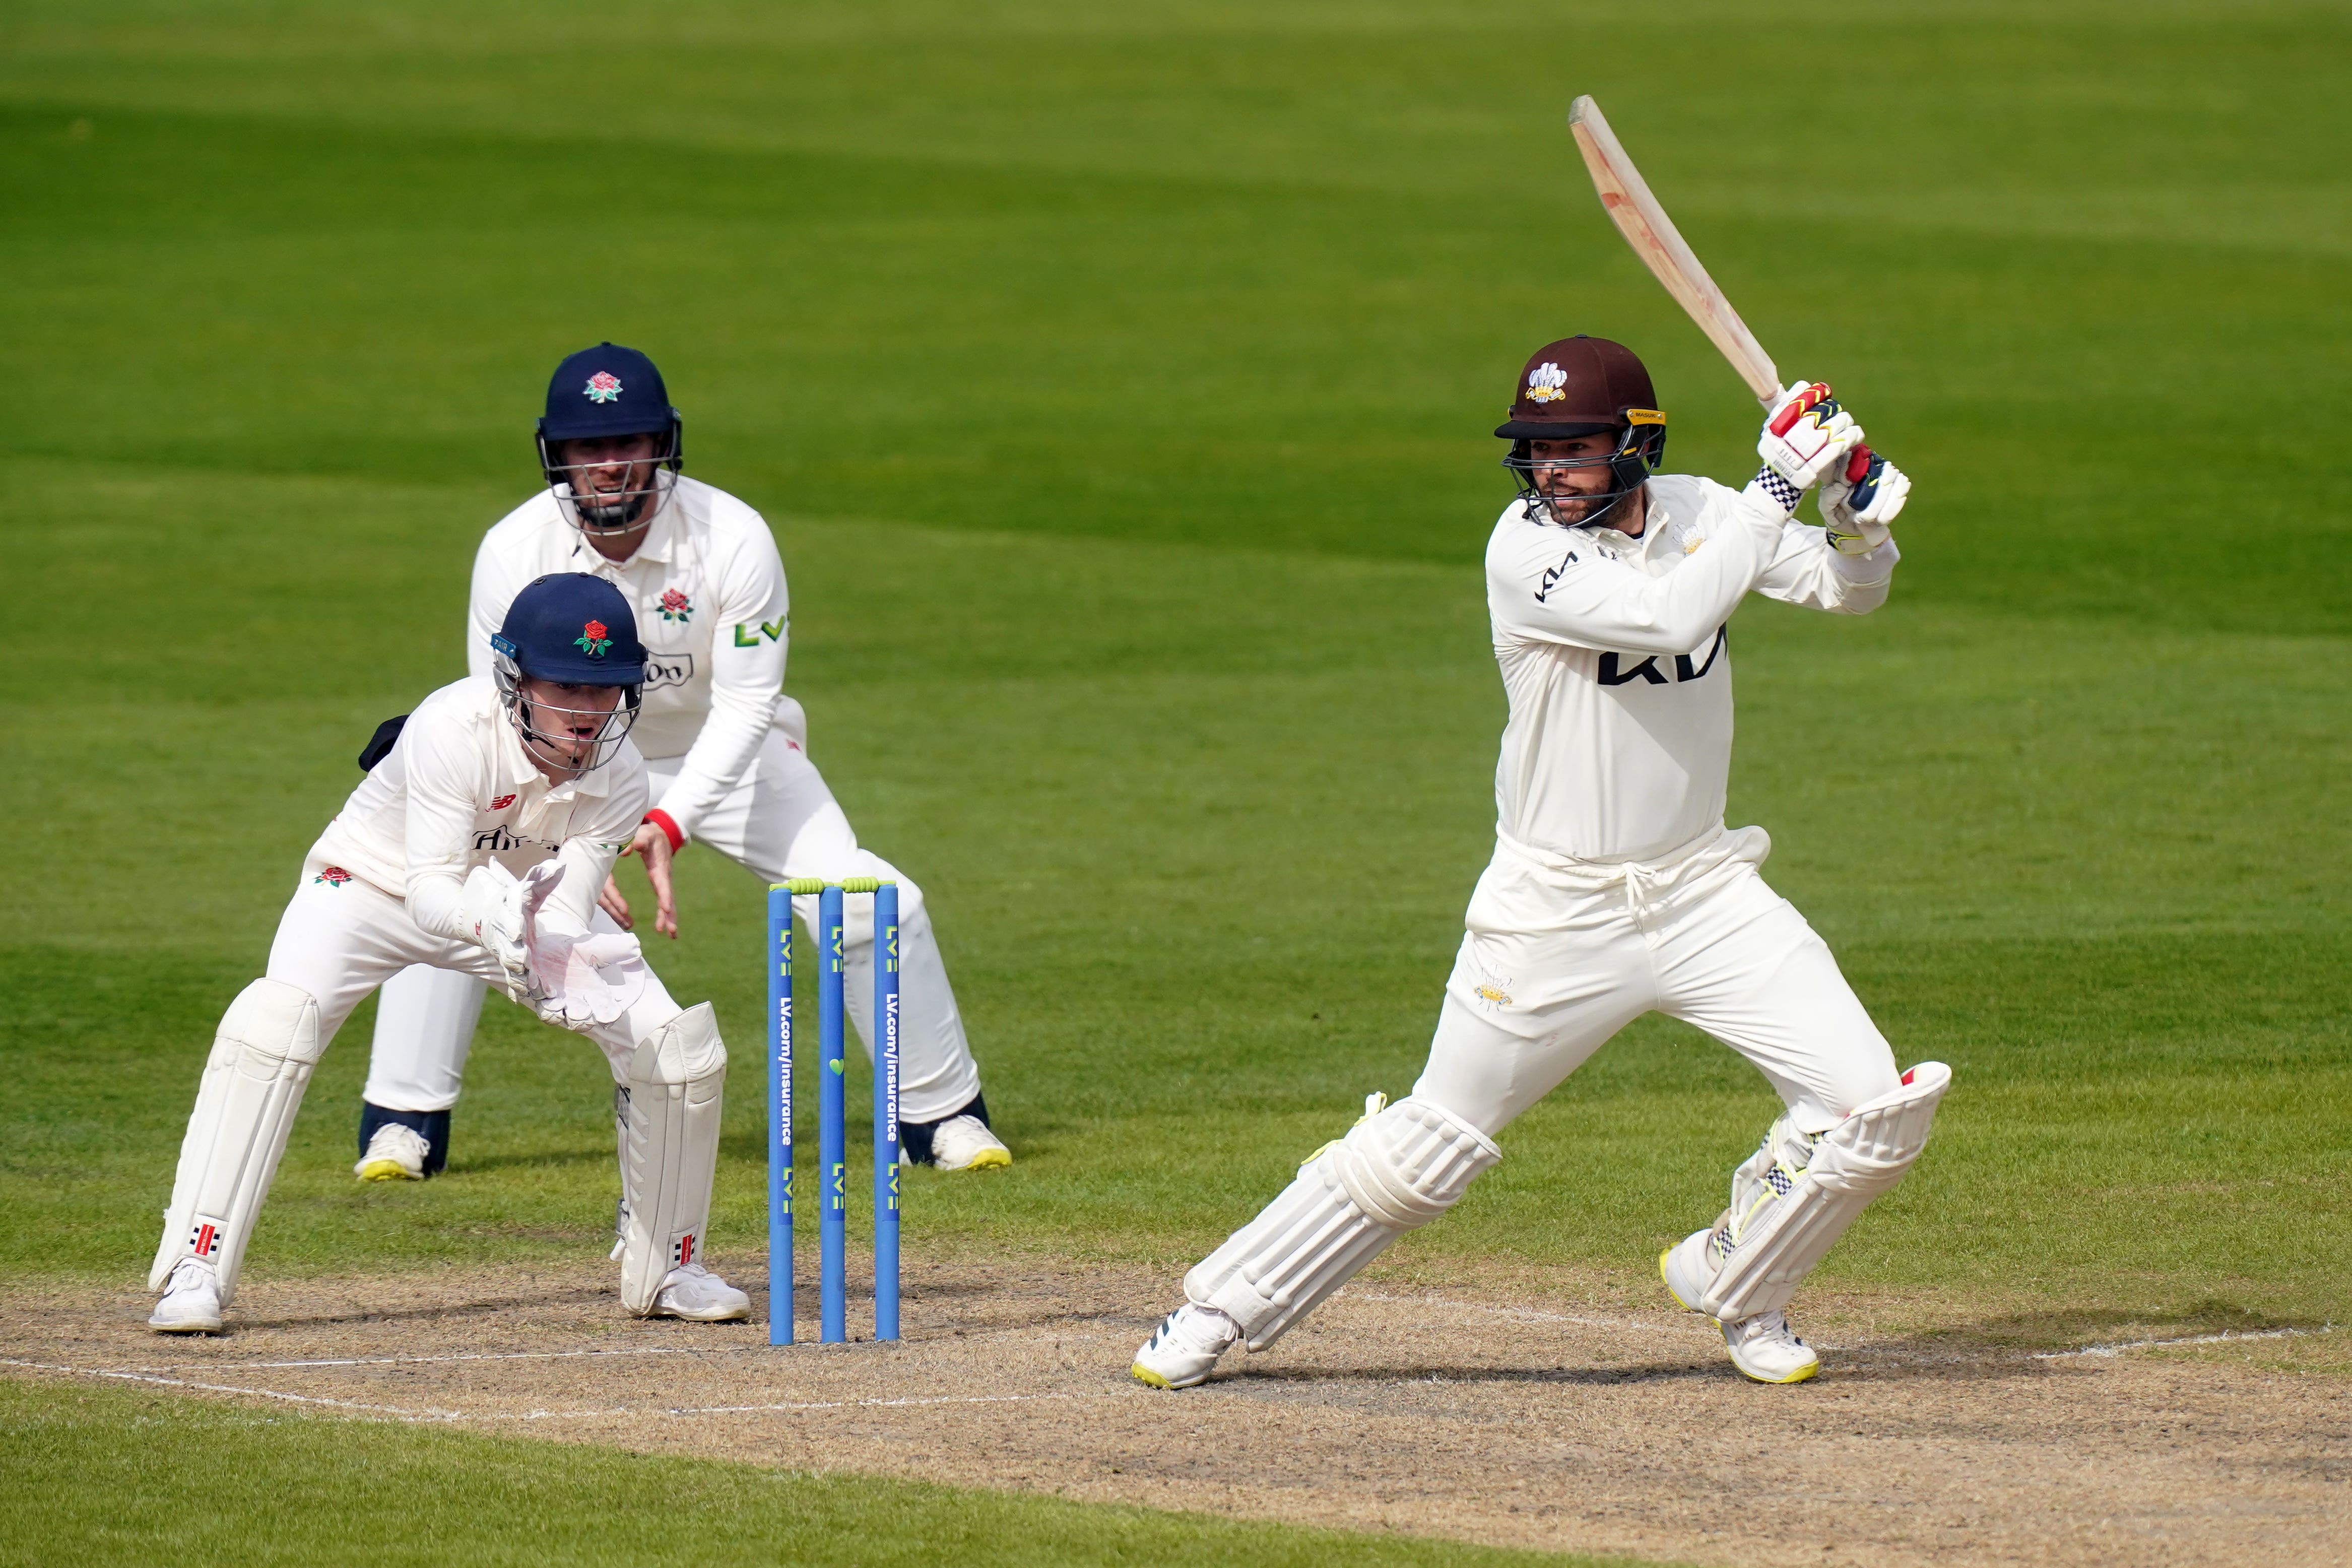 Ben Foakes helped Surrey make a strong start to their title defence against Lancashire (Mike Egerton/PA)